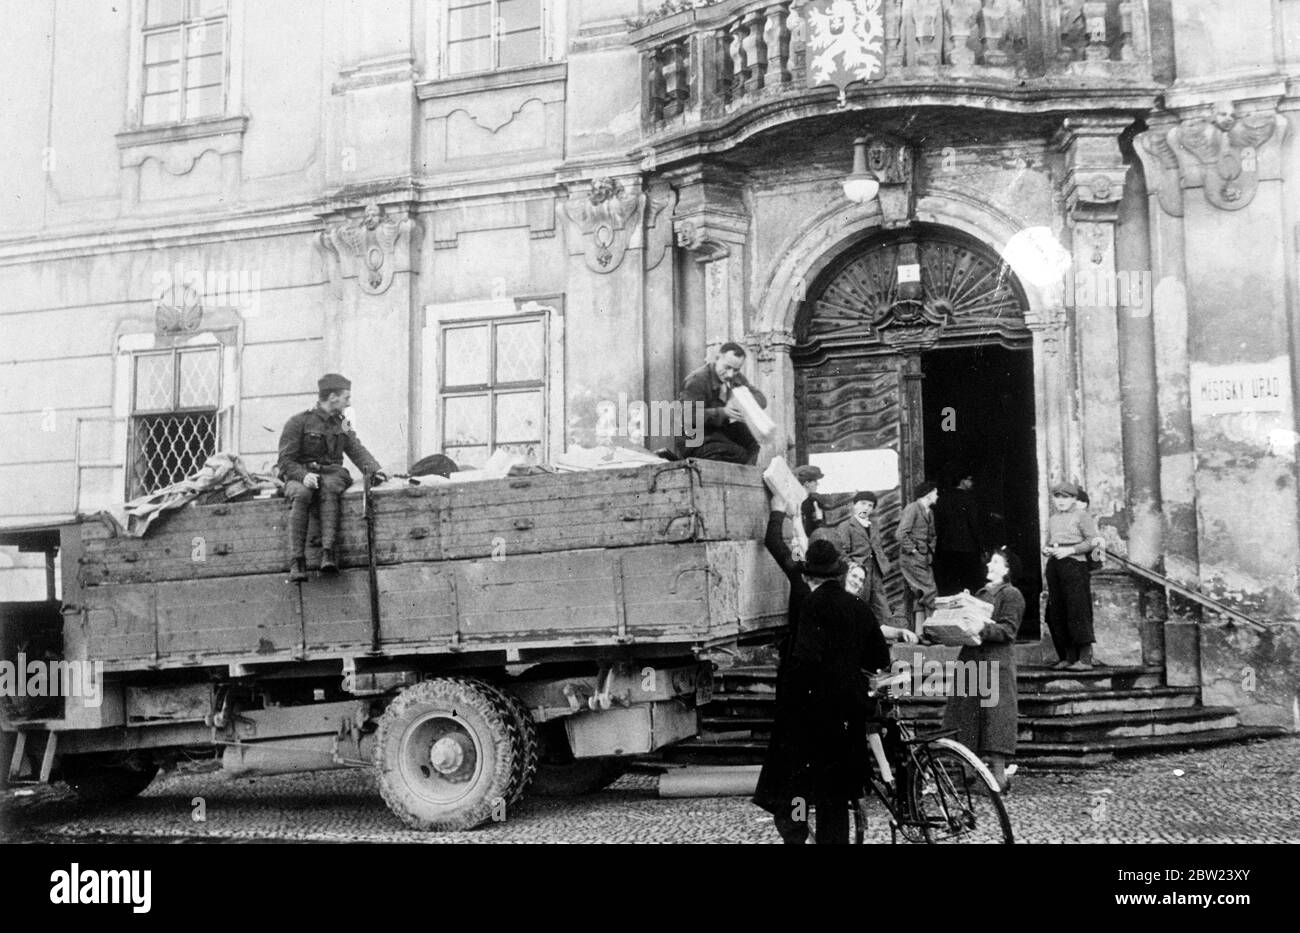 Politcka, the Bohemian town with 90% Czech population and only 2% German, has been taken over by the Germans under the Munich agreement. The town was founded in 1265 by King Premysl II. Photo shows: Town documents been loaded from the town hall before the entry of the Germans. 11 October 1938 Stock Photo